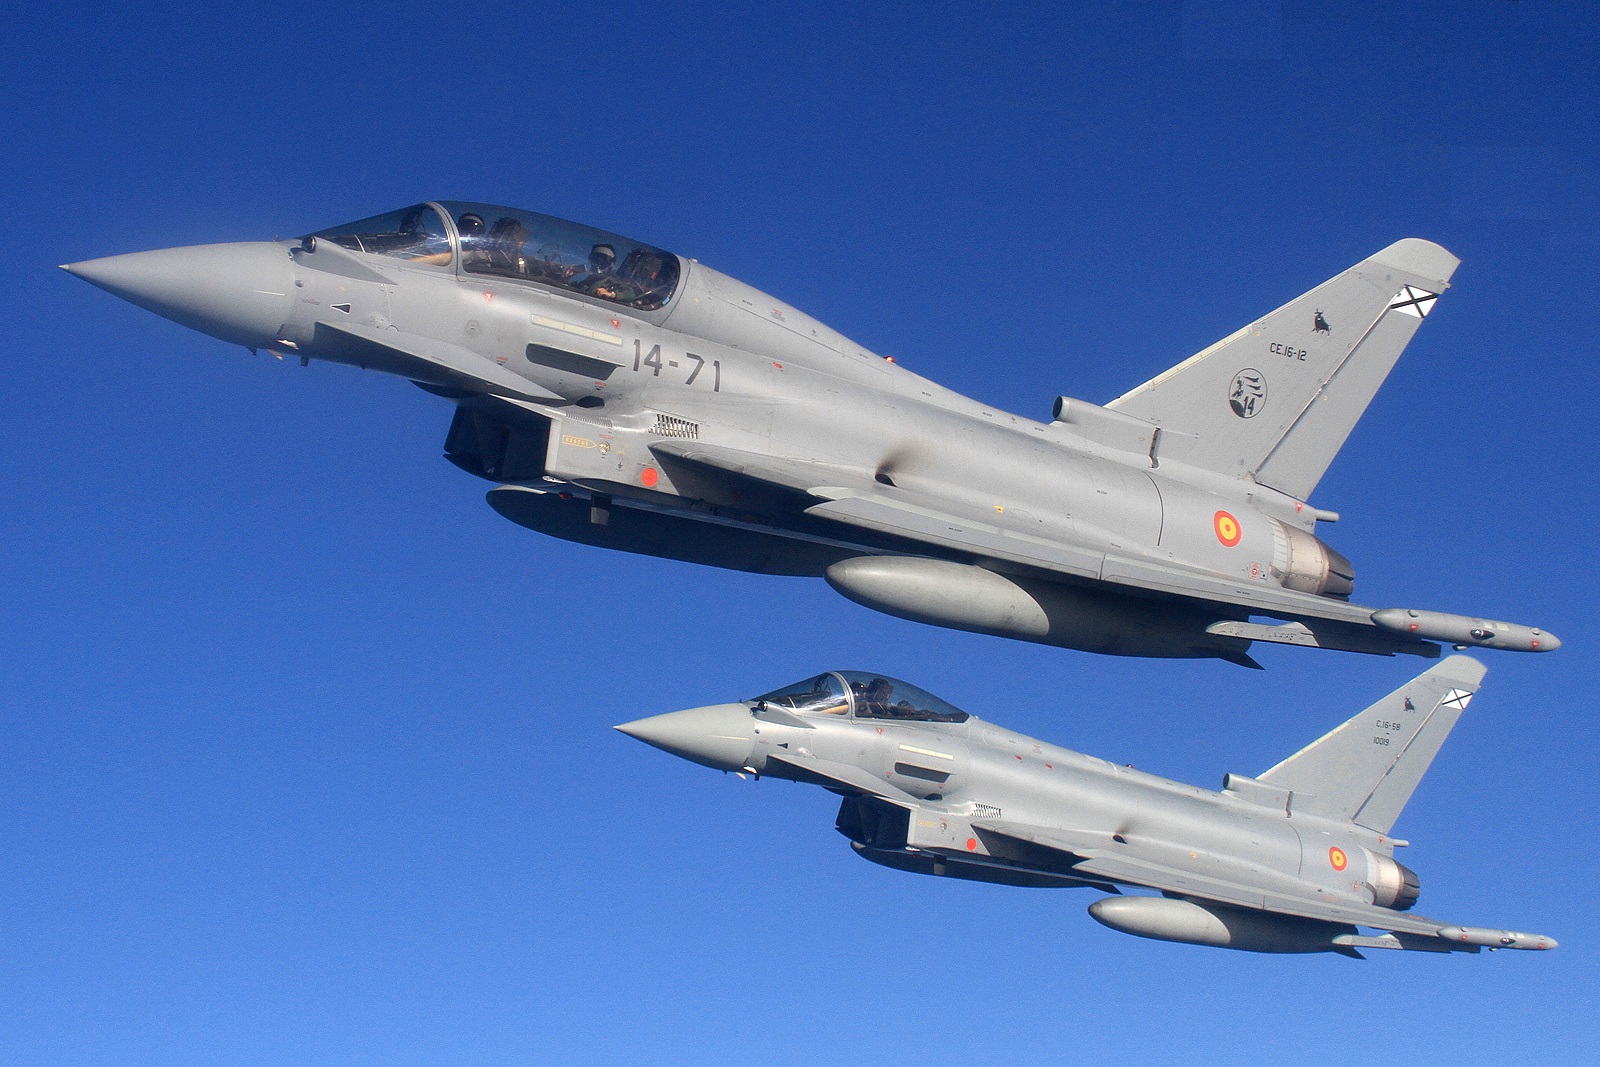 Spain Government to Acquire 25 Additional Eurofighters Under Halcon II Program